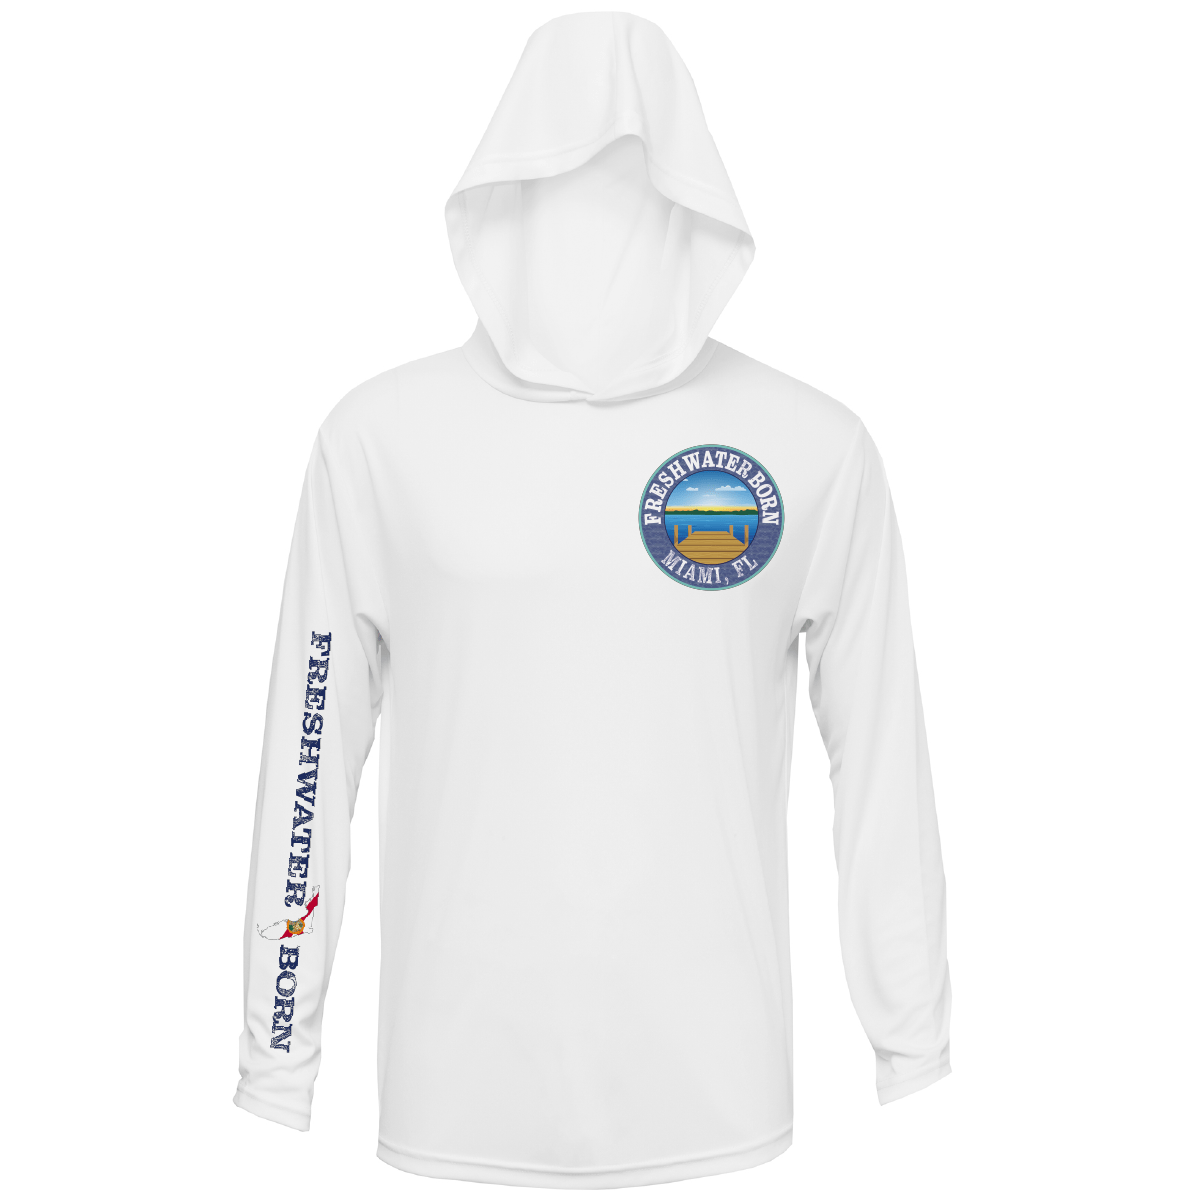 Shirts Long sleeve , UV protection, Moisture wicking, Bass in the Hood